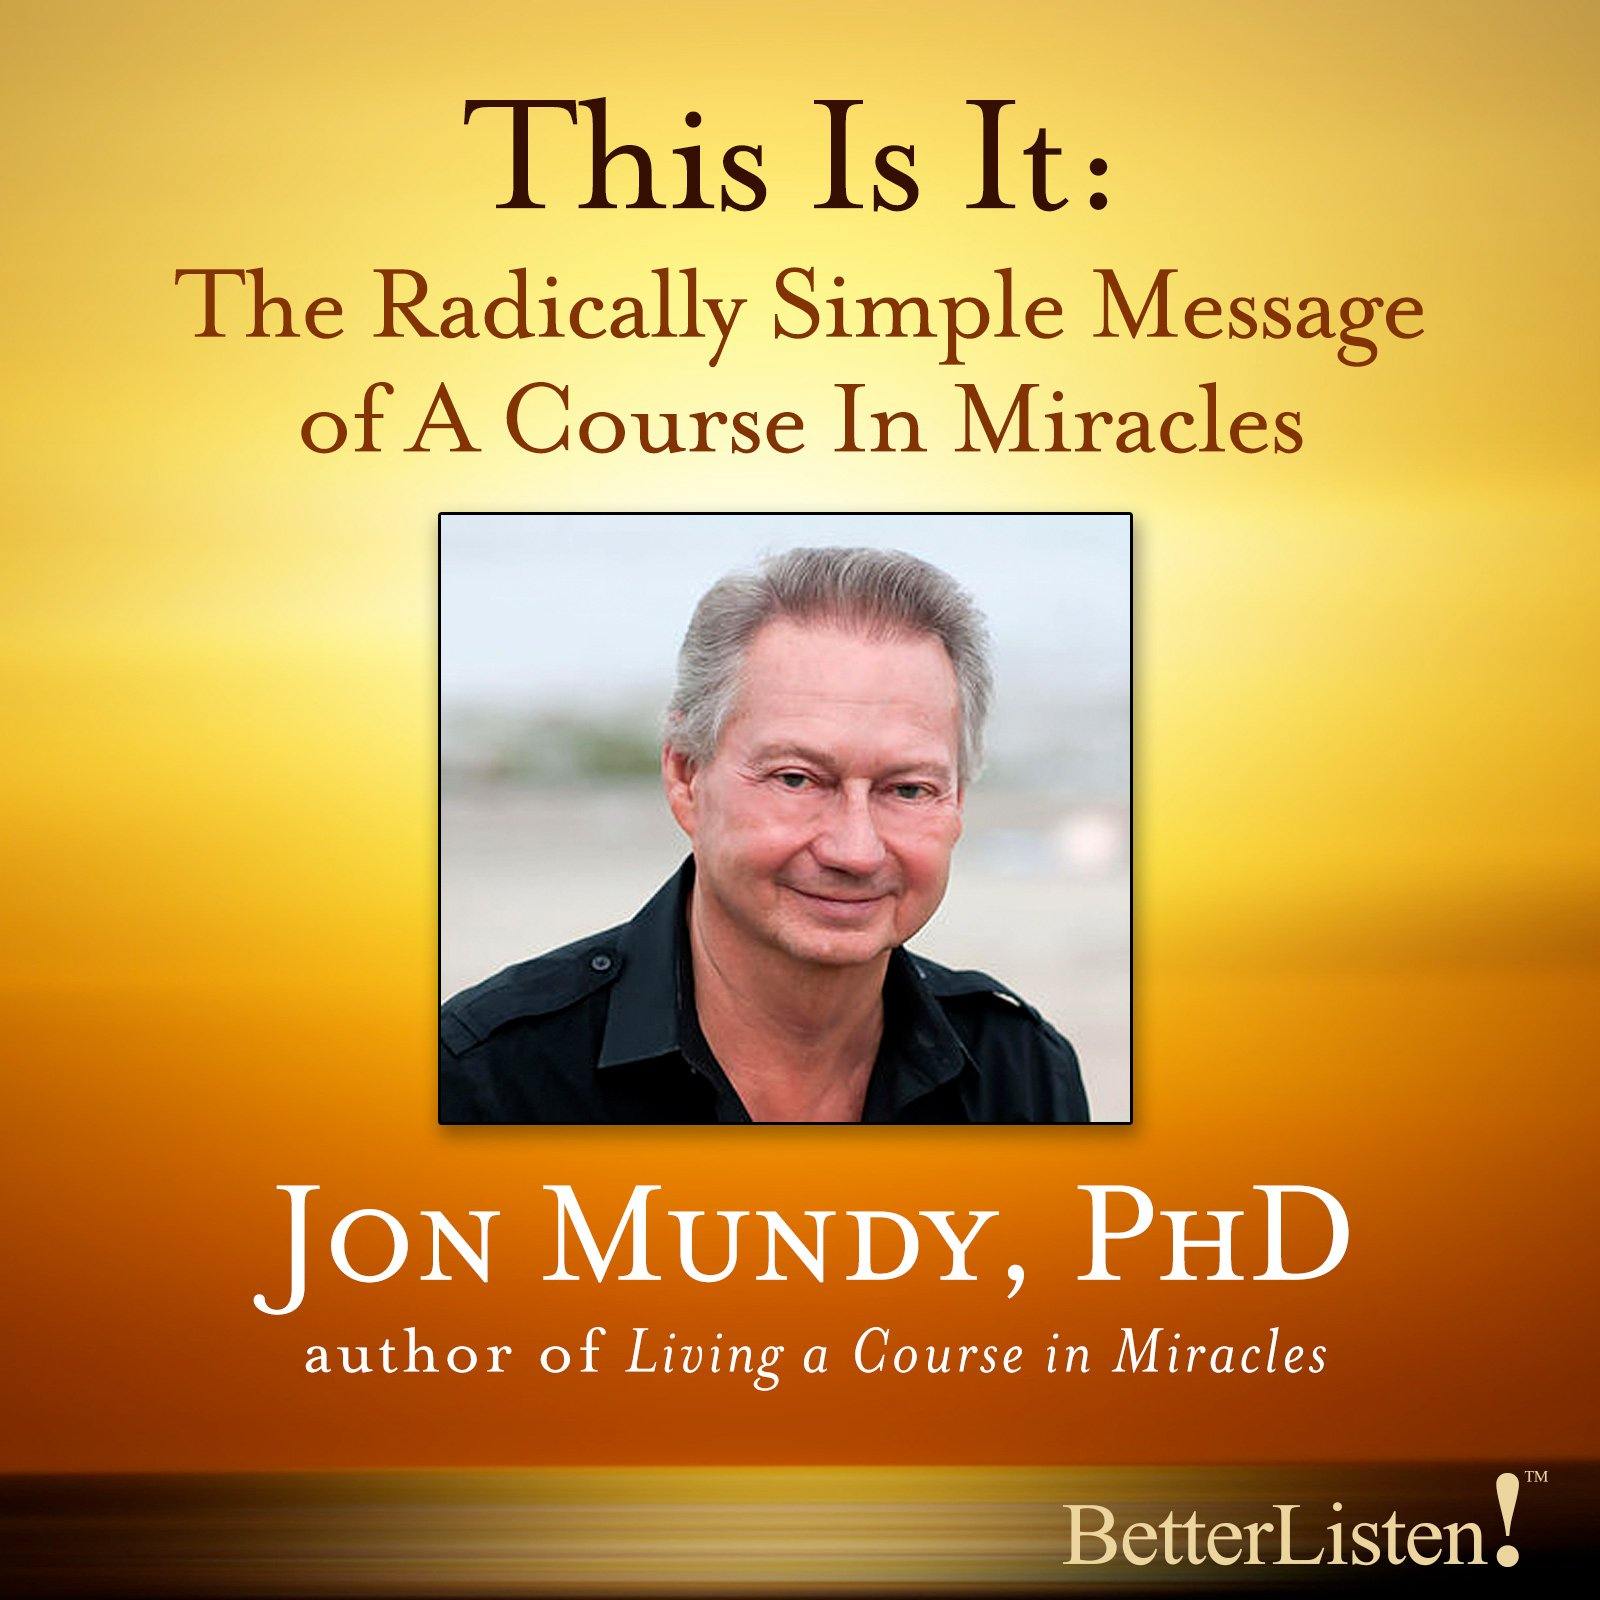 This Is It: The Radically Simple Message of A Course In Miracles with Jon Mundy Audio Program Jon Mundy - BetterListen!